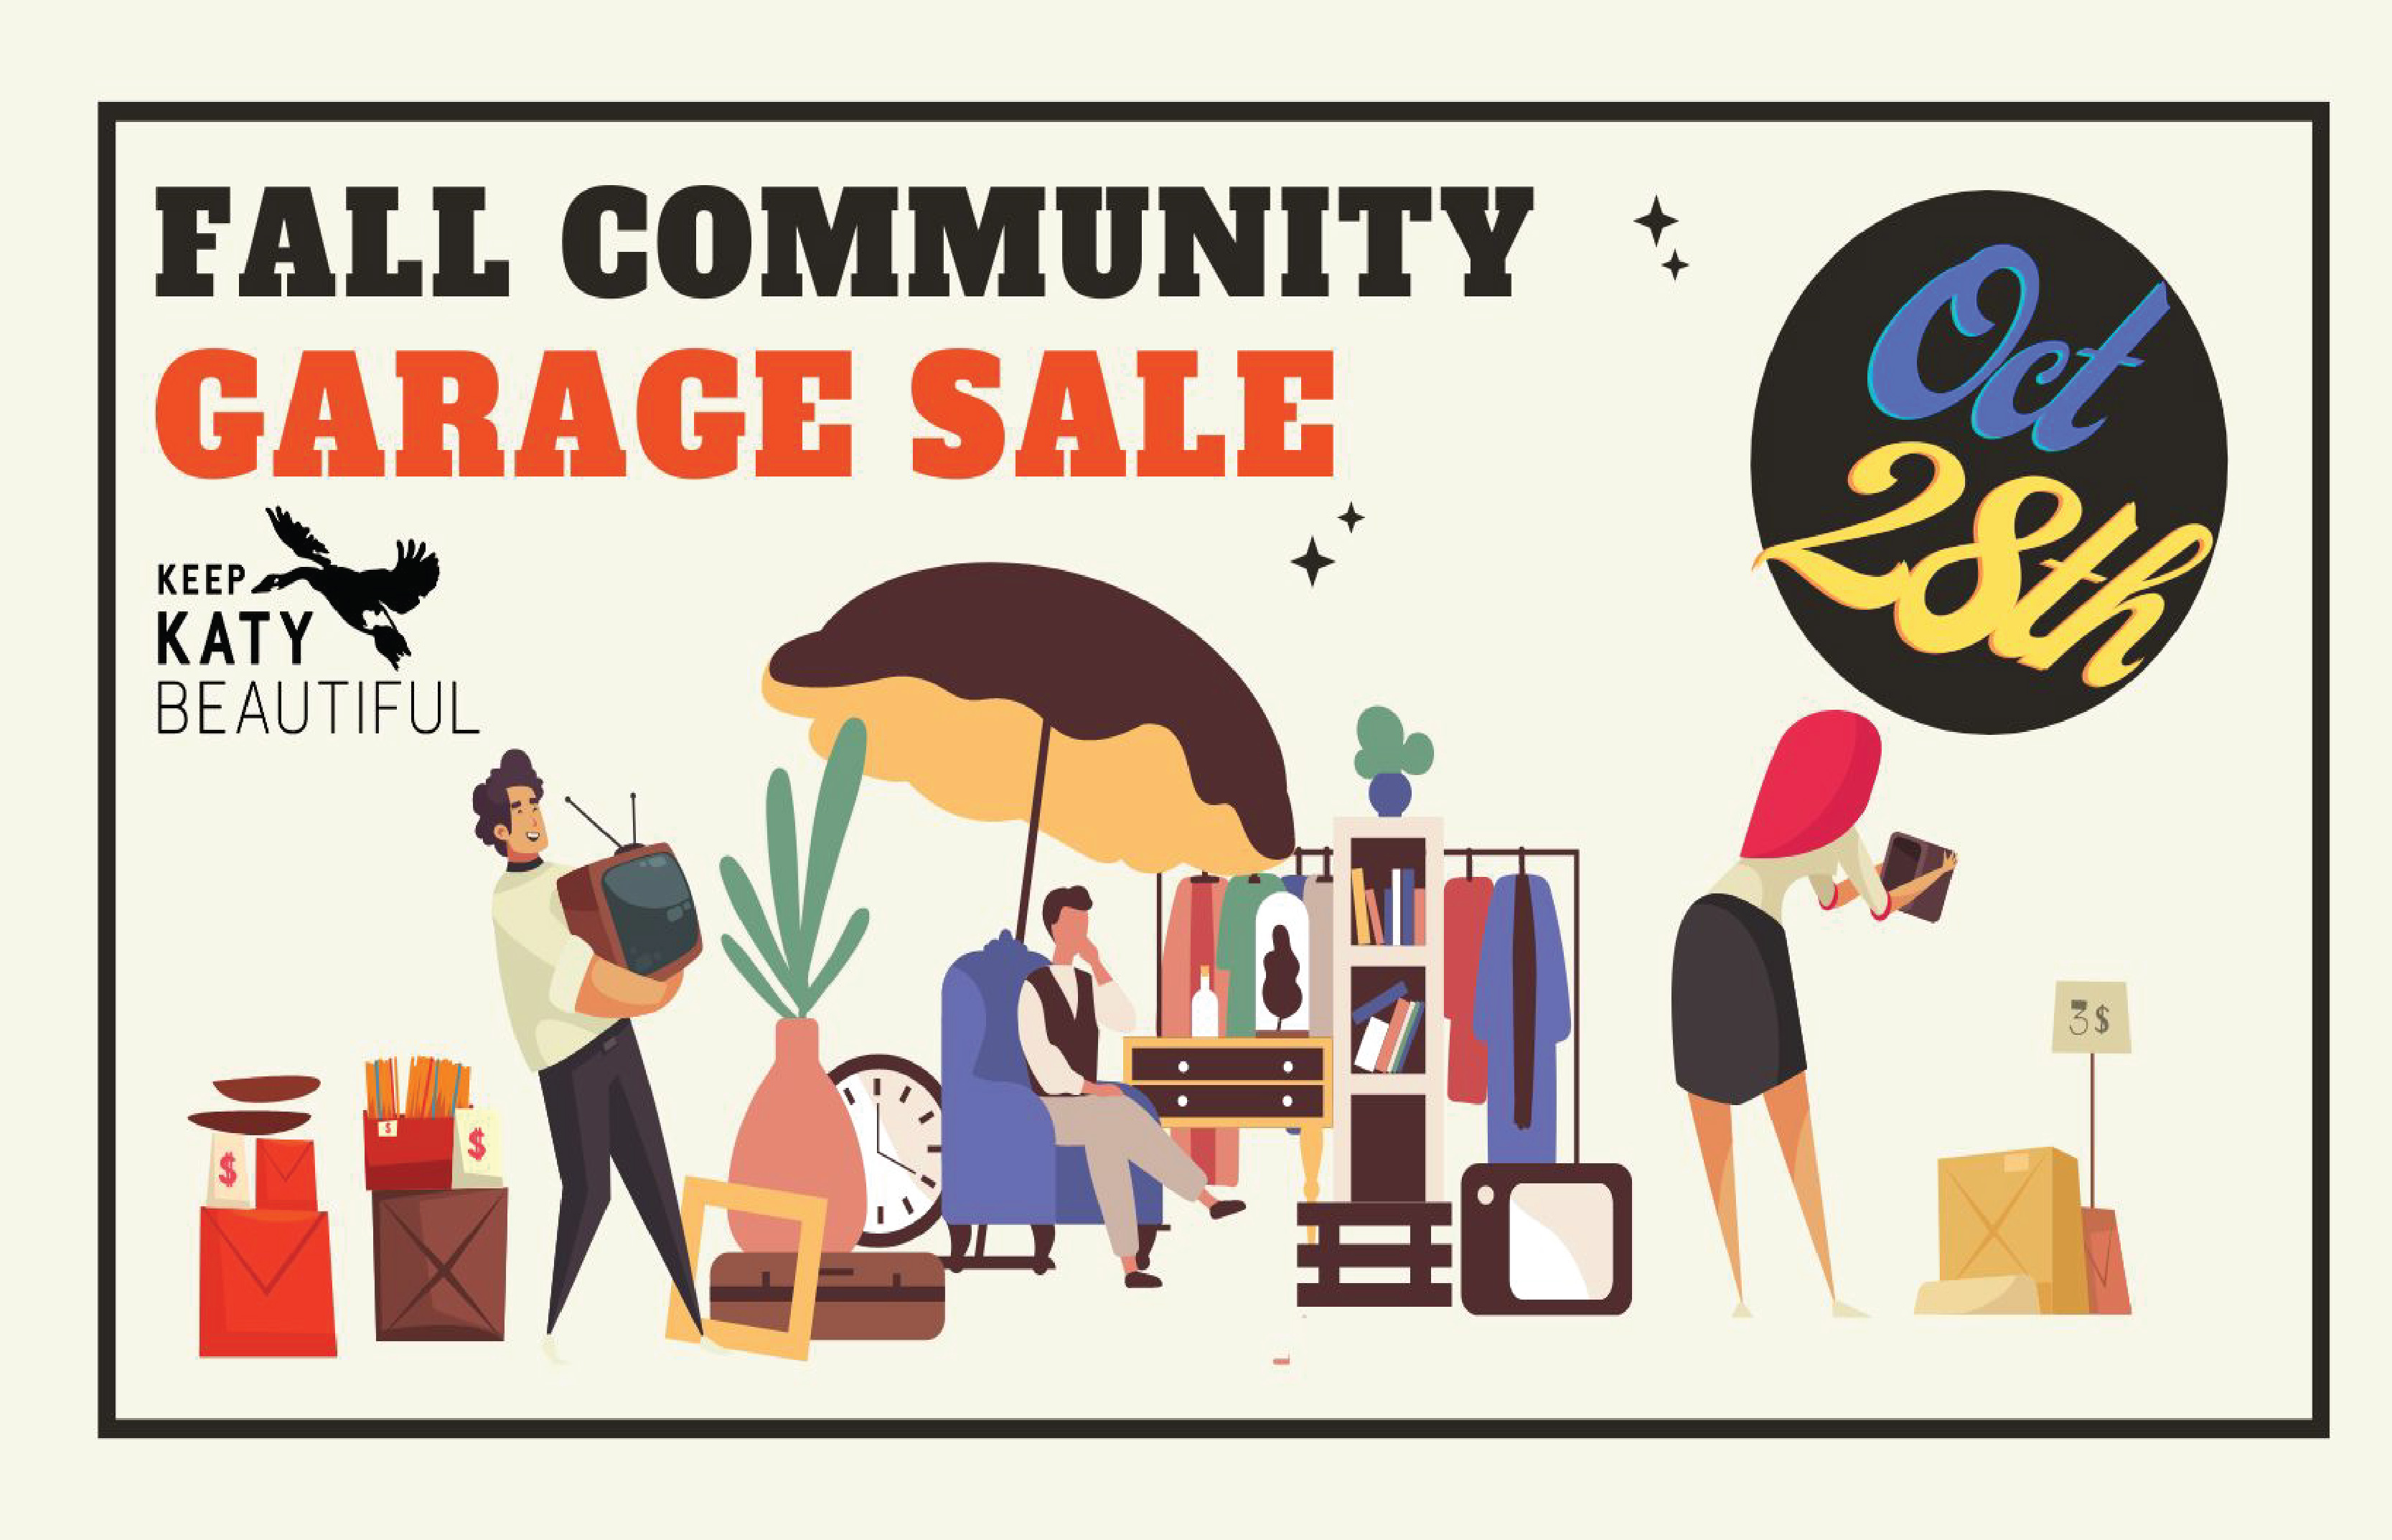 REMINDER: Sign Up for the City of Katy Fall Community Garage Sale